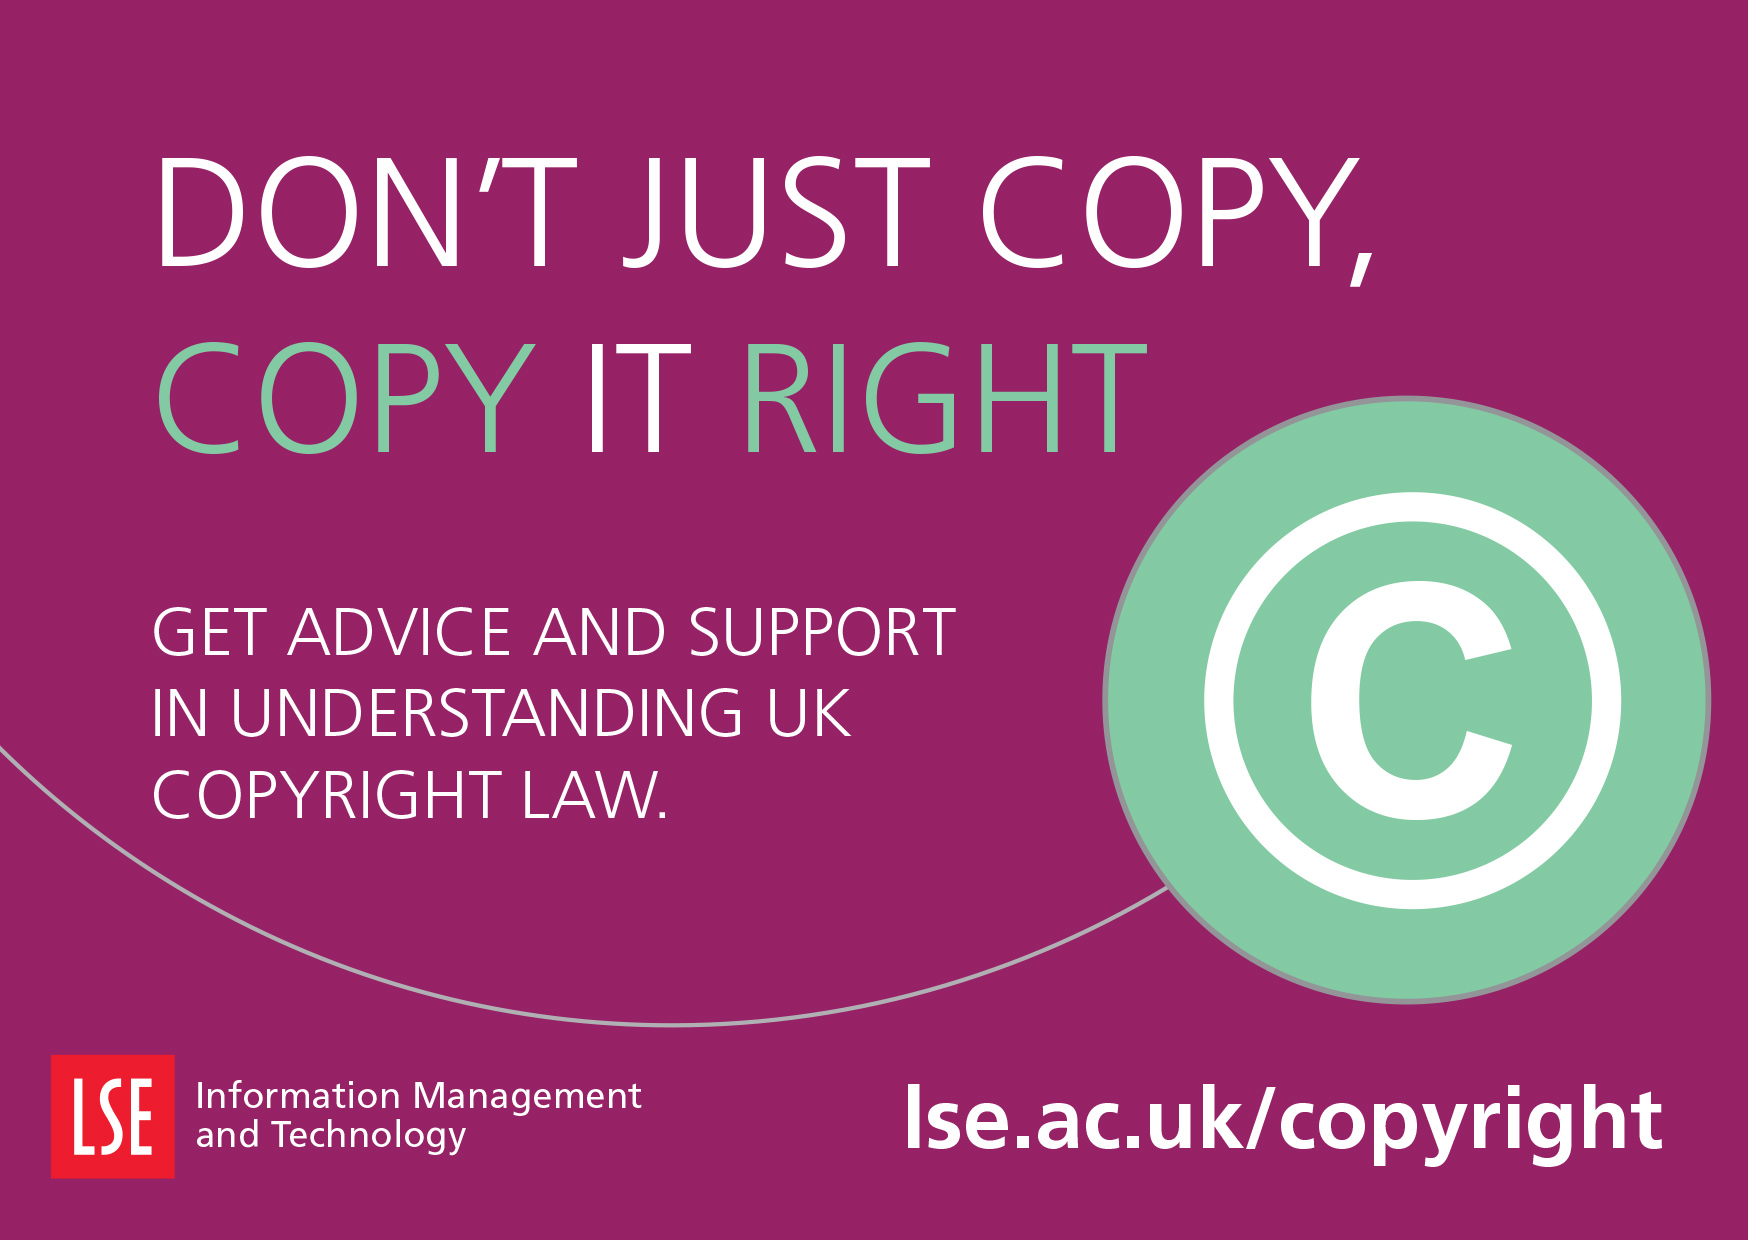 Don't just copy: copy it right!